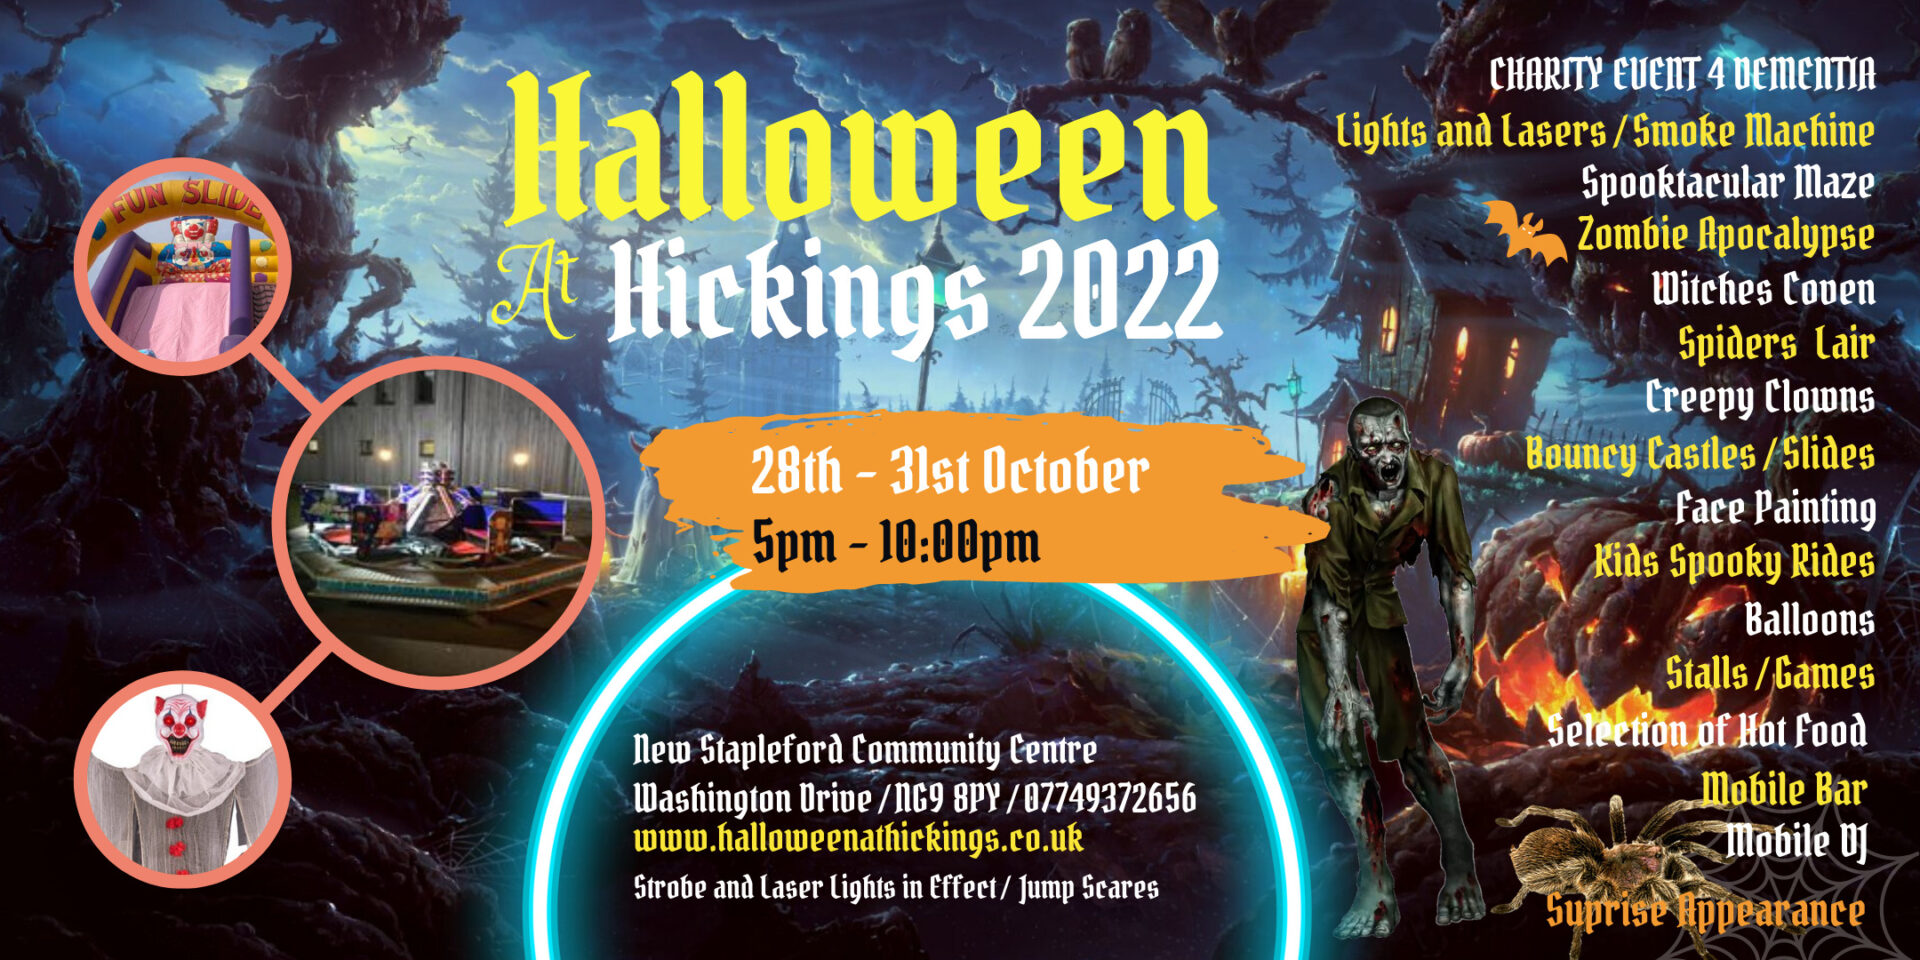 Halloween at Hickings 2022 – Scare Maze, Ghosts, Zombies and Rides